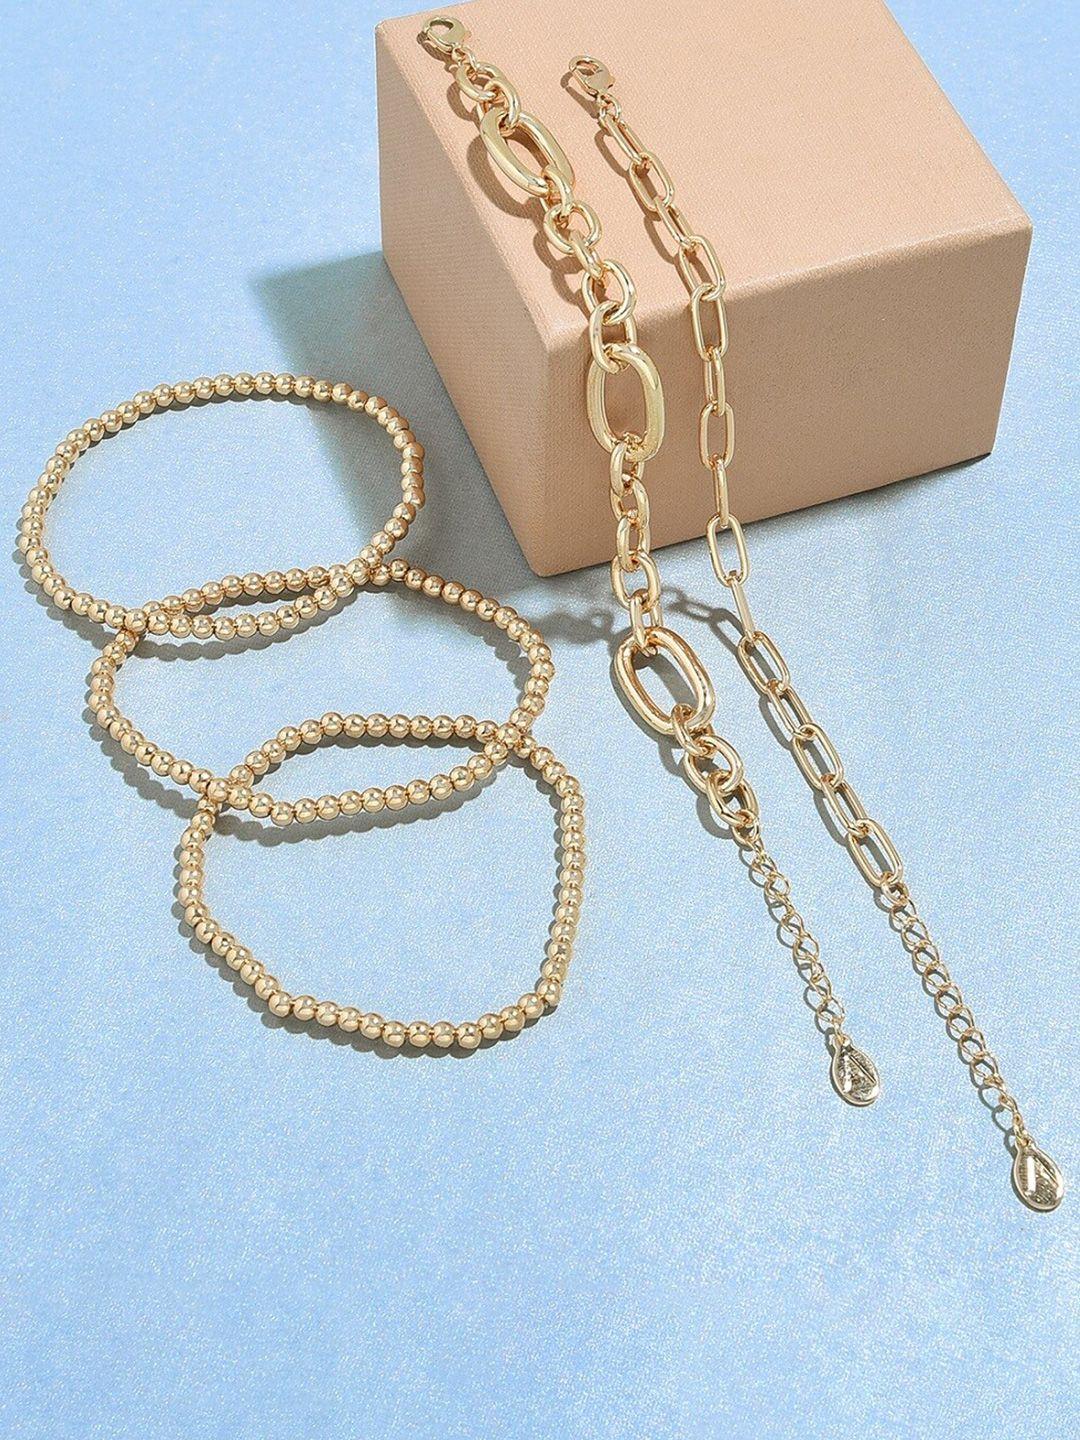 accessorize london women pack of 5 reconnected stretch chain bracelets